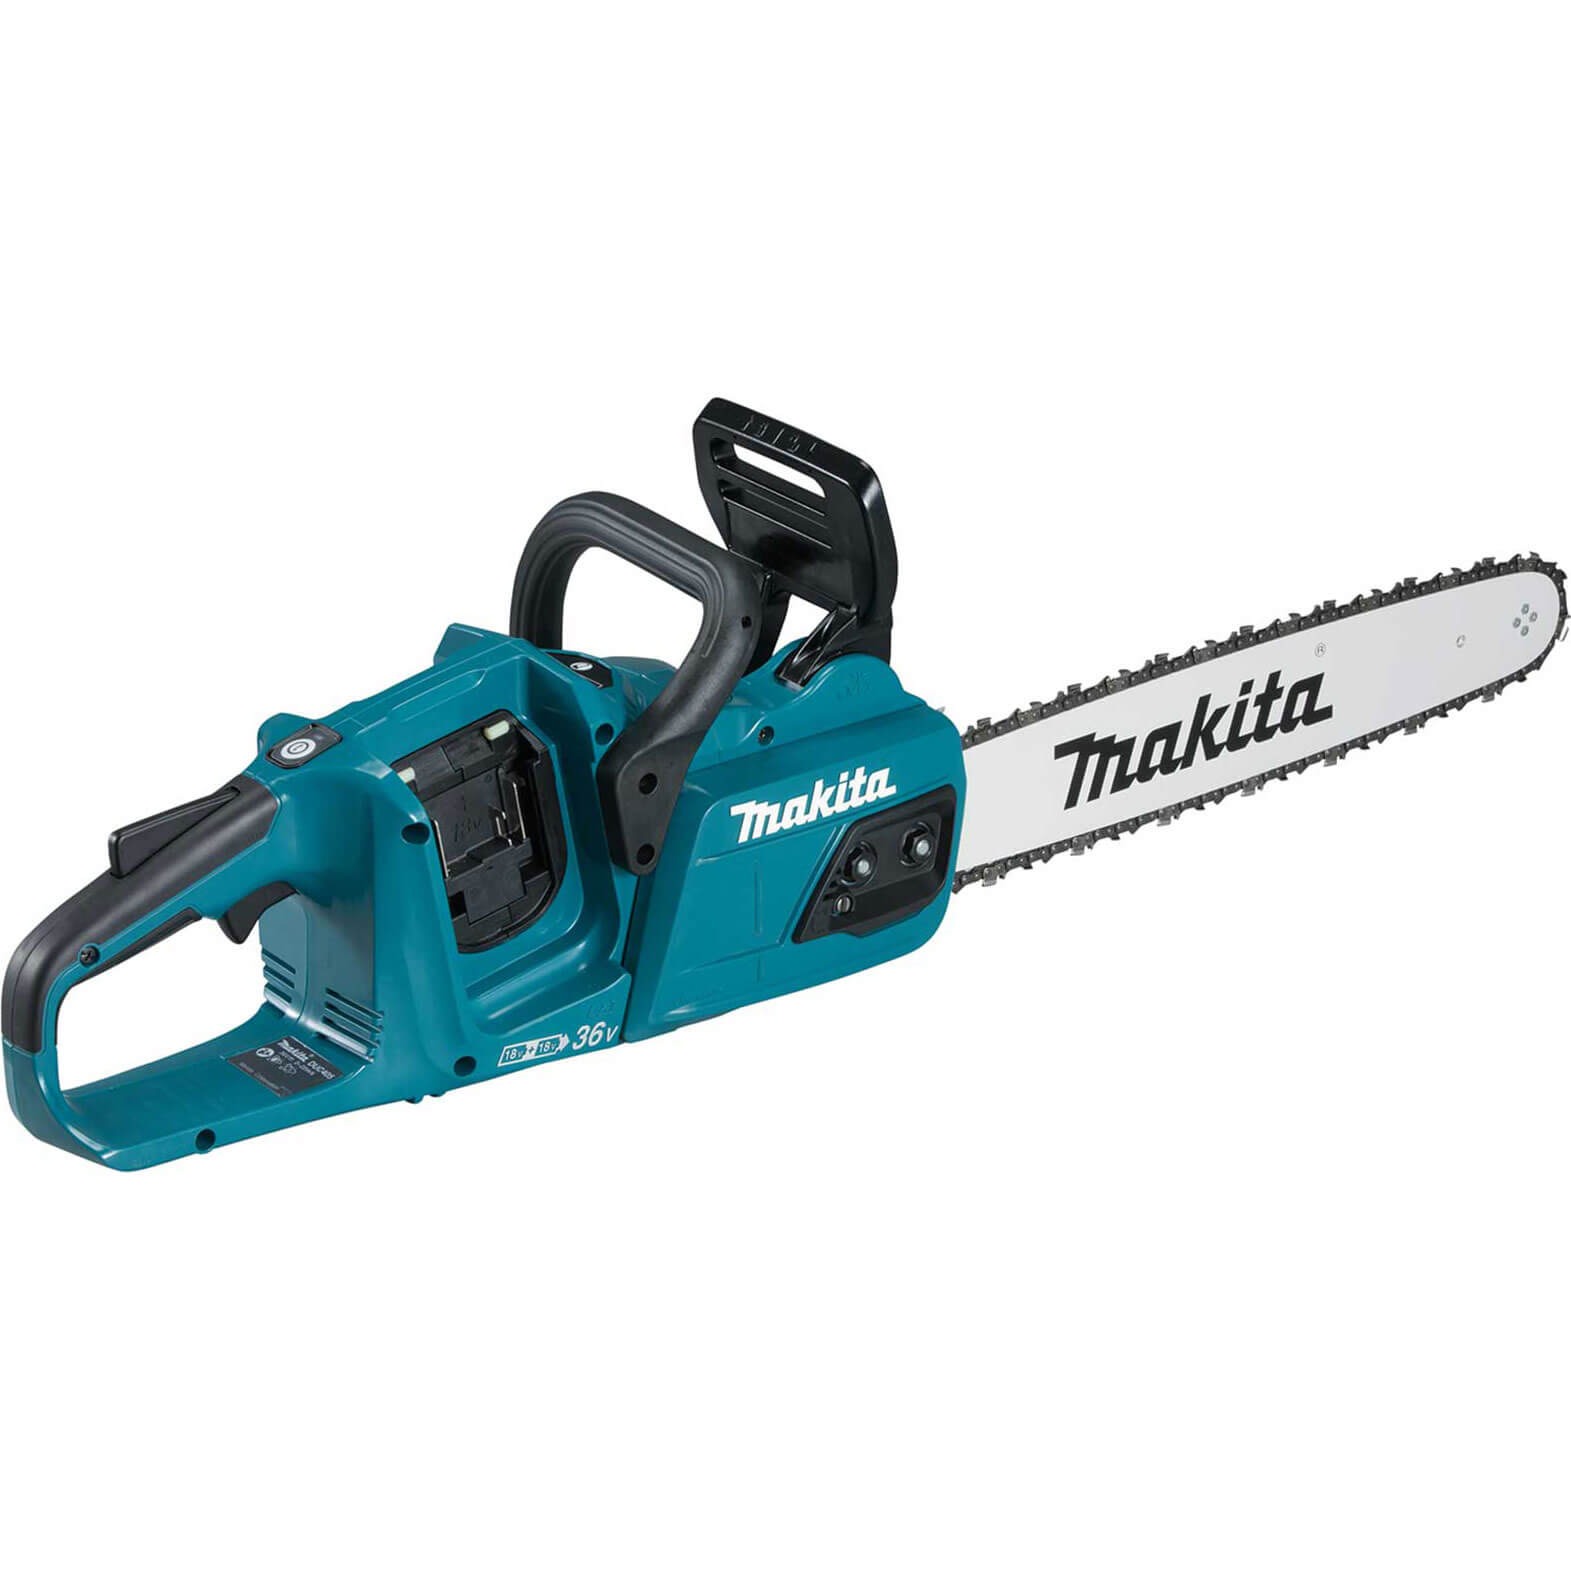 Makita DUC355 18v LXT Cordless Brushless Chainsaw 350mm No Batteries No Charger